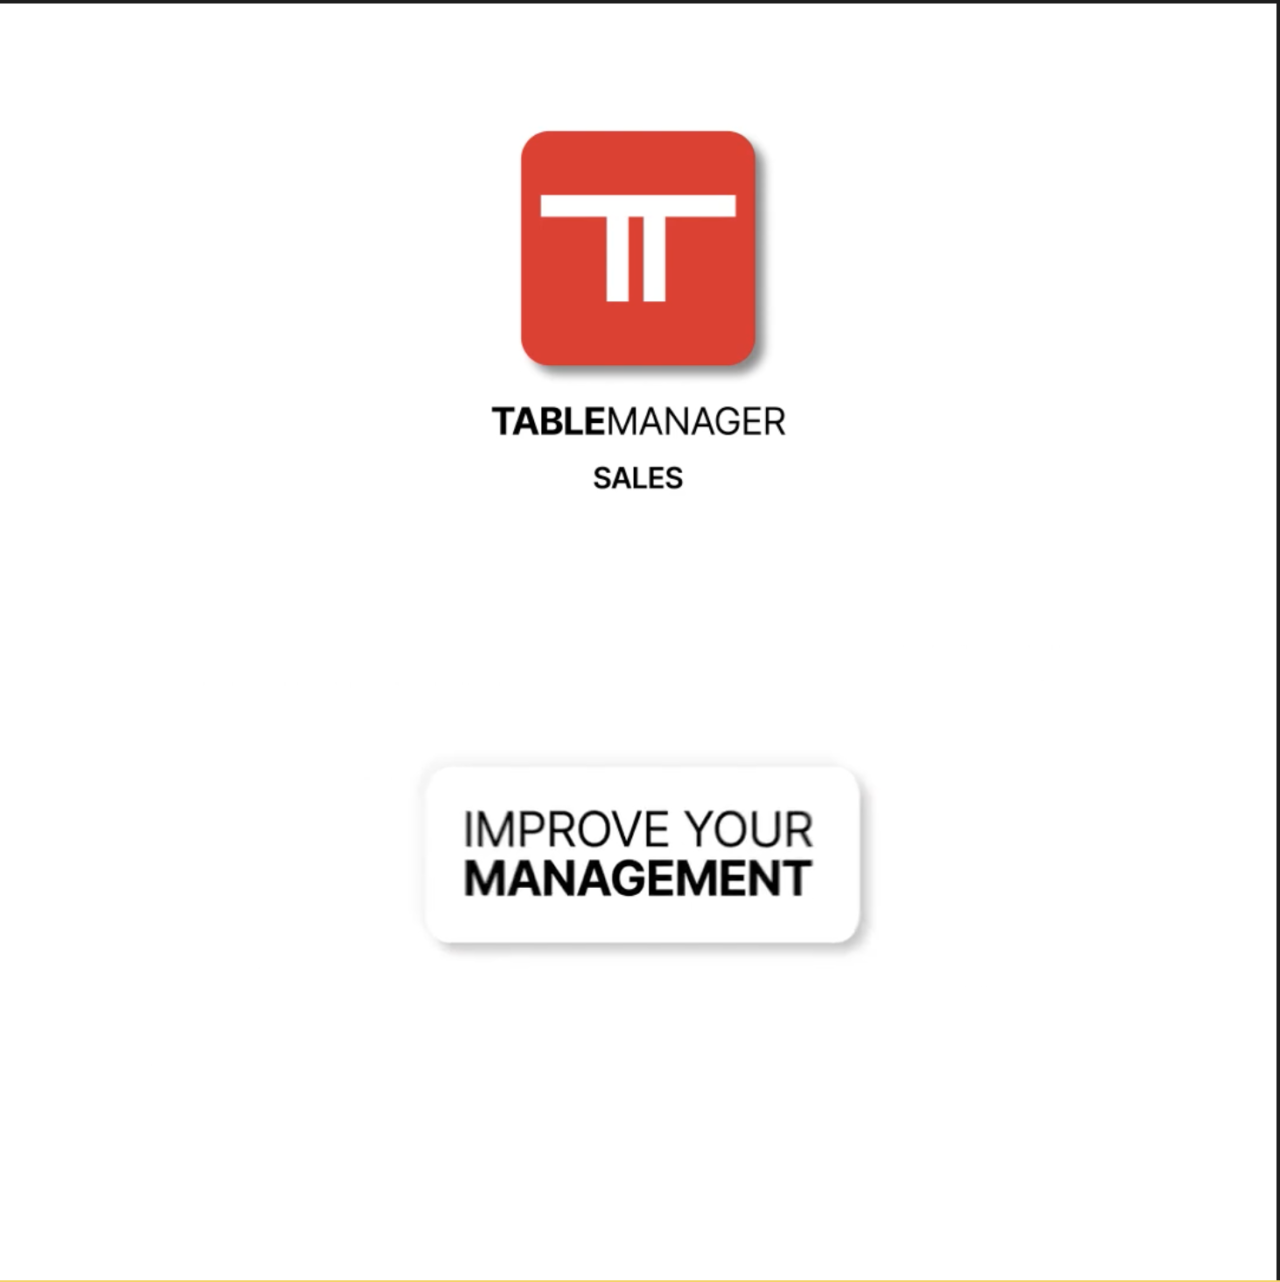 Tablemanager